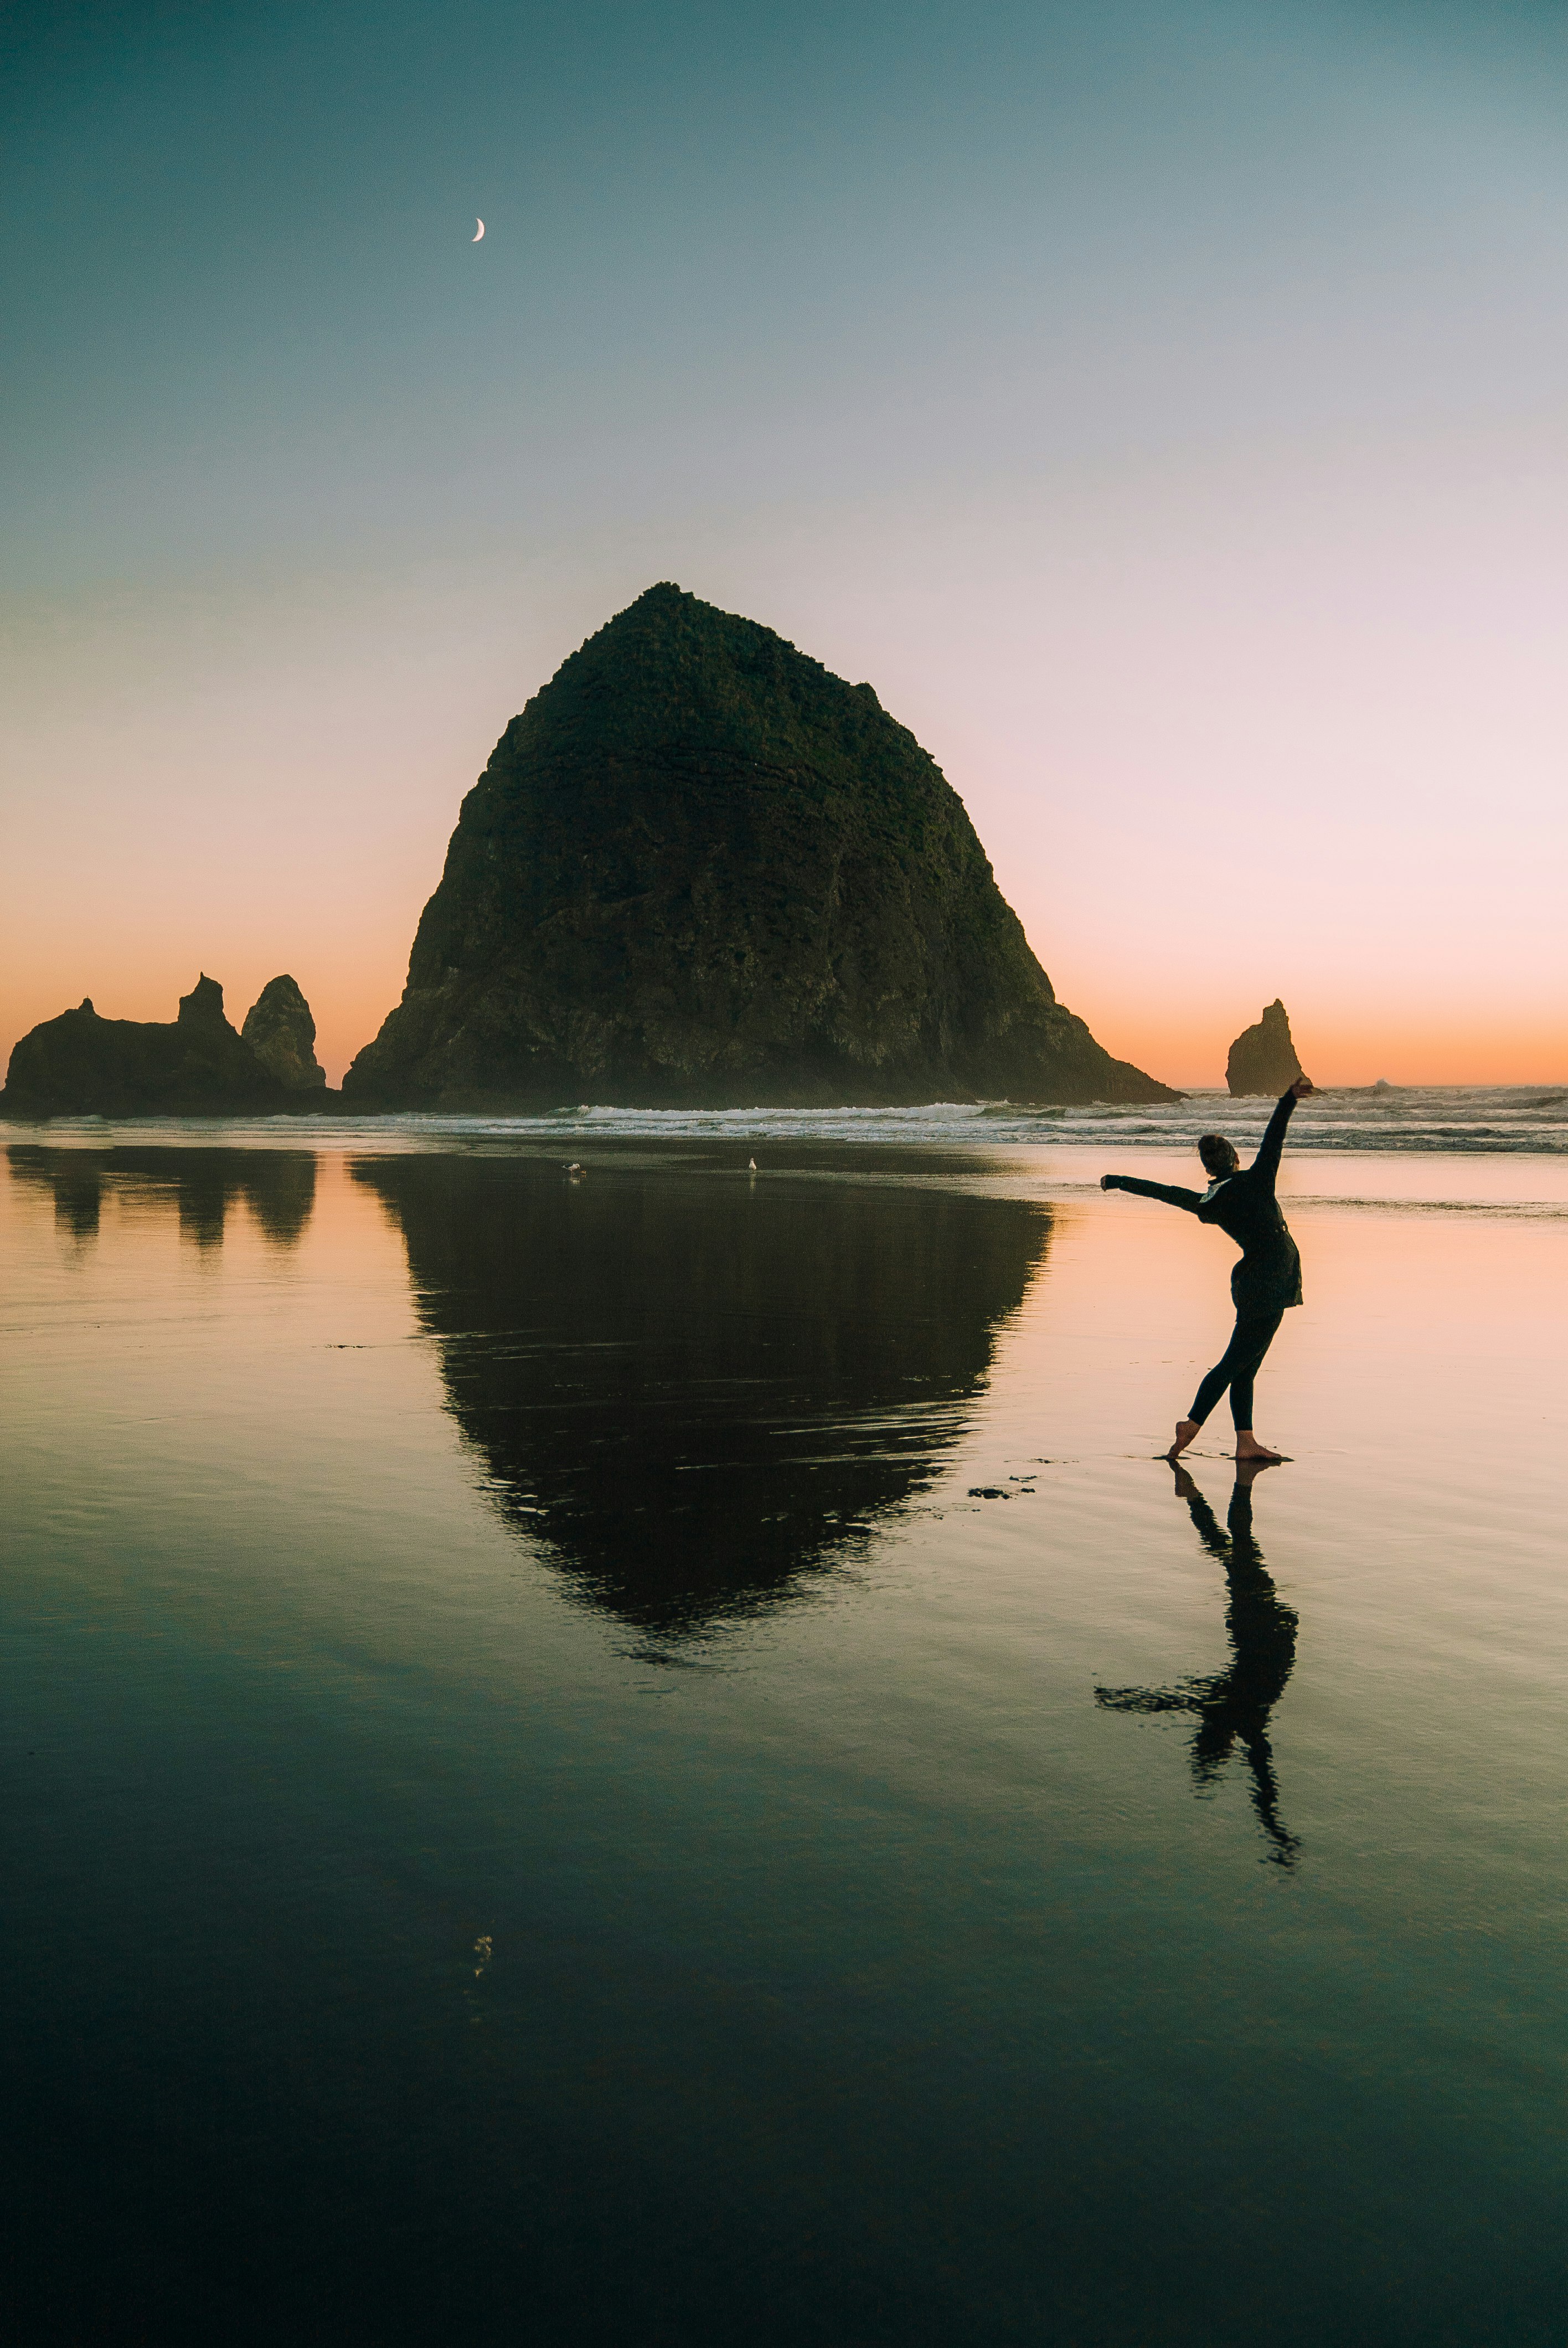 On a beautiful night along the pacific coast, we caught the sunset at Canon Beach, Oregon. With the water receding, a beautiful reflection was caught.